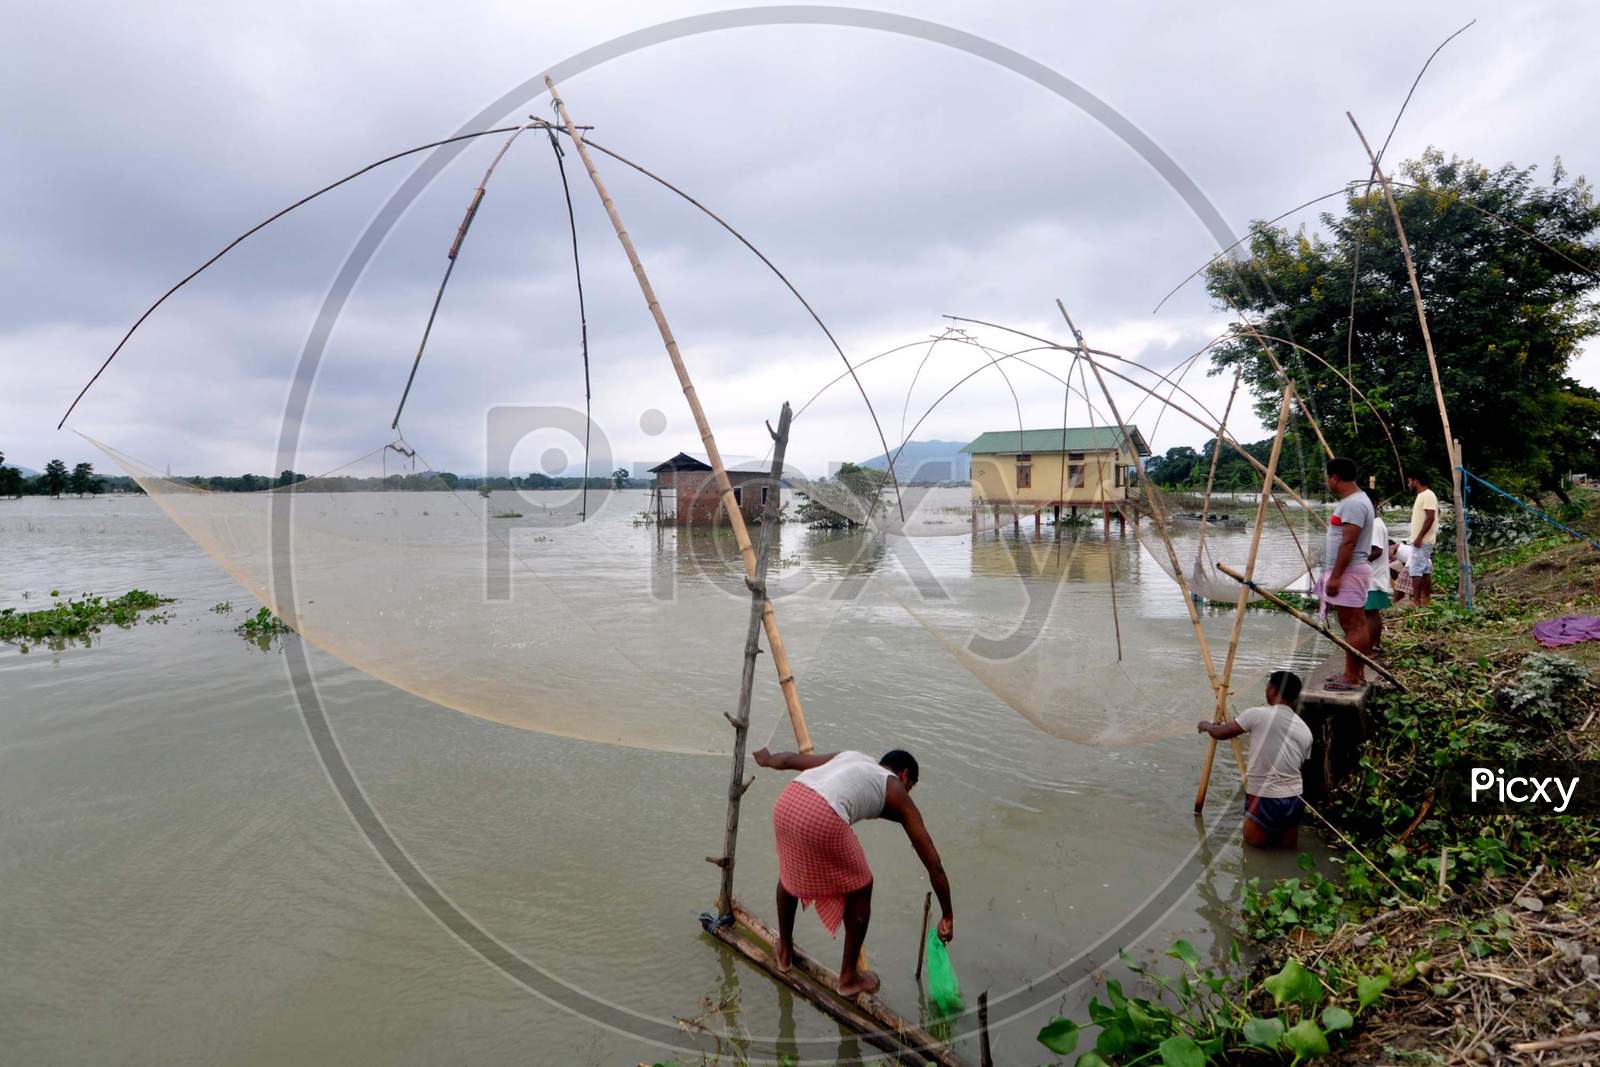 Villagers fish in flooded waters in Morigaon, Assam on July 18, 2020